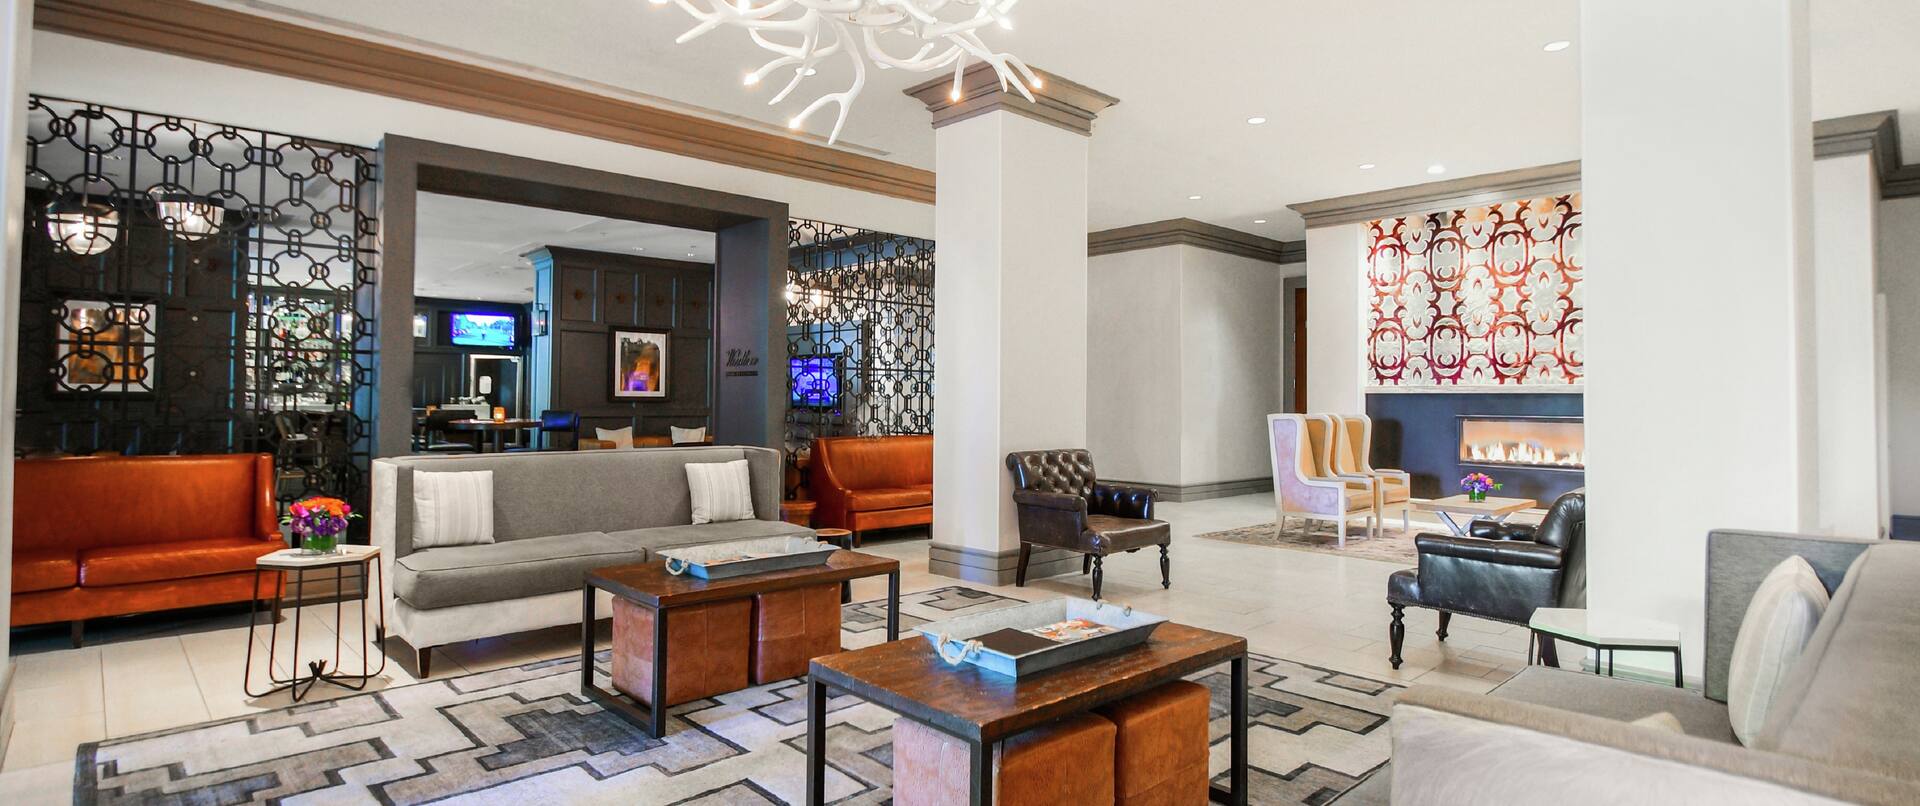 Lobby and Lounge Areas